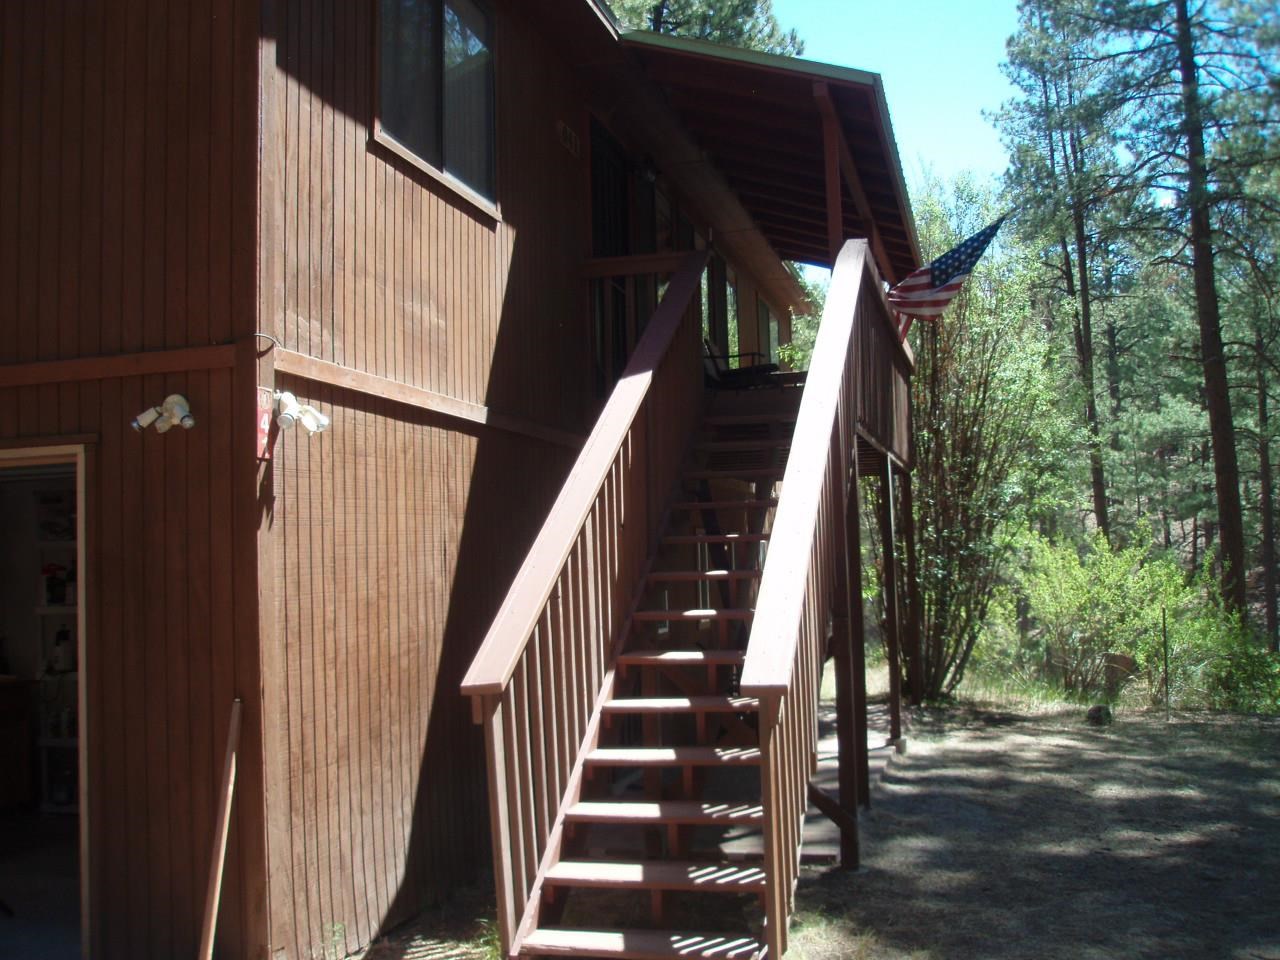 41 Hoven Weep, Jemez Springs, New Mexico 87025, 3 Bedrooms Bedrooms, ,3 BathroomsBathrooms,Residential,For Sale,41 Hoven Weep,202102808